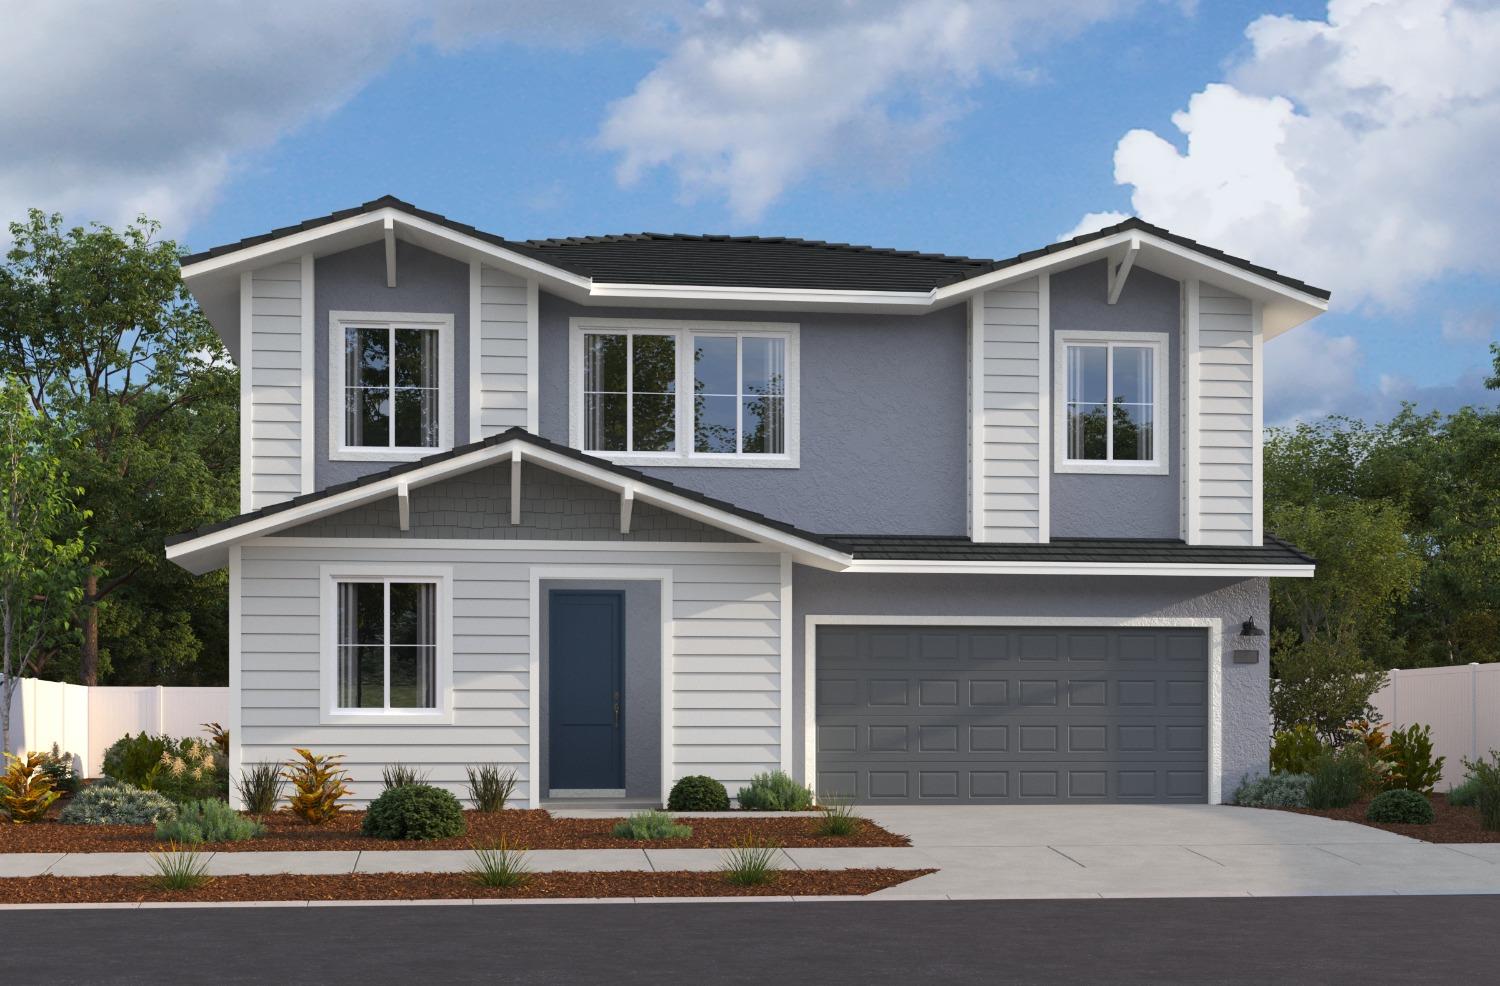 Gorgeous new Plan 3 at Stonehaven in the vineyard area! This two-story home is located on a south-fa